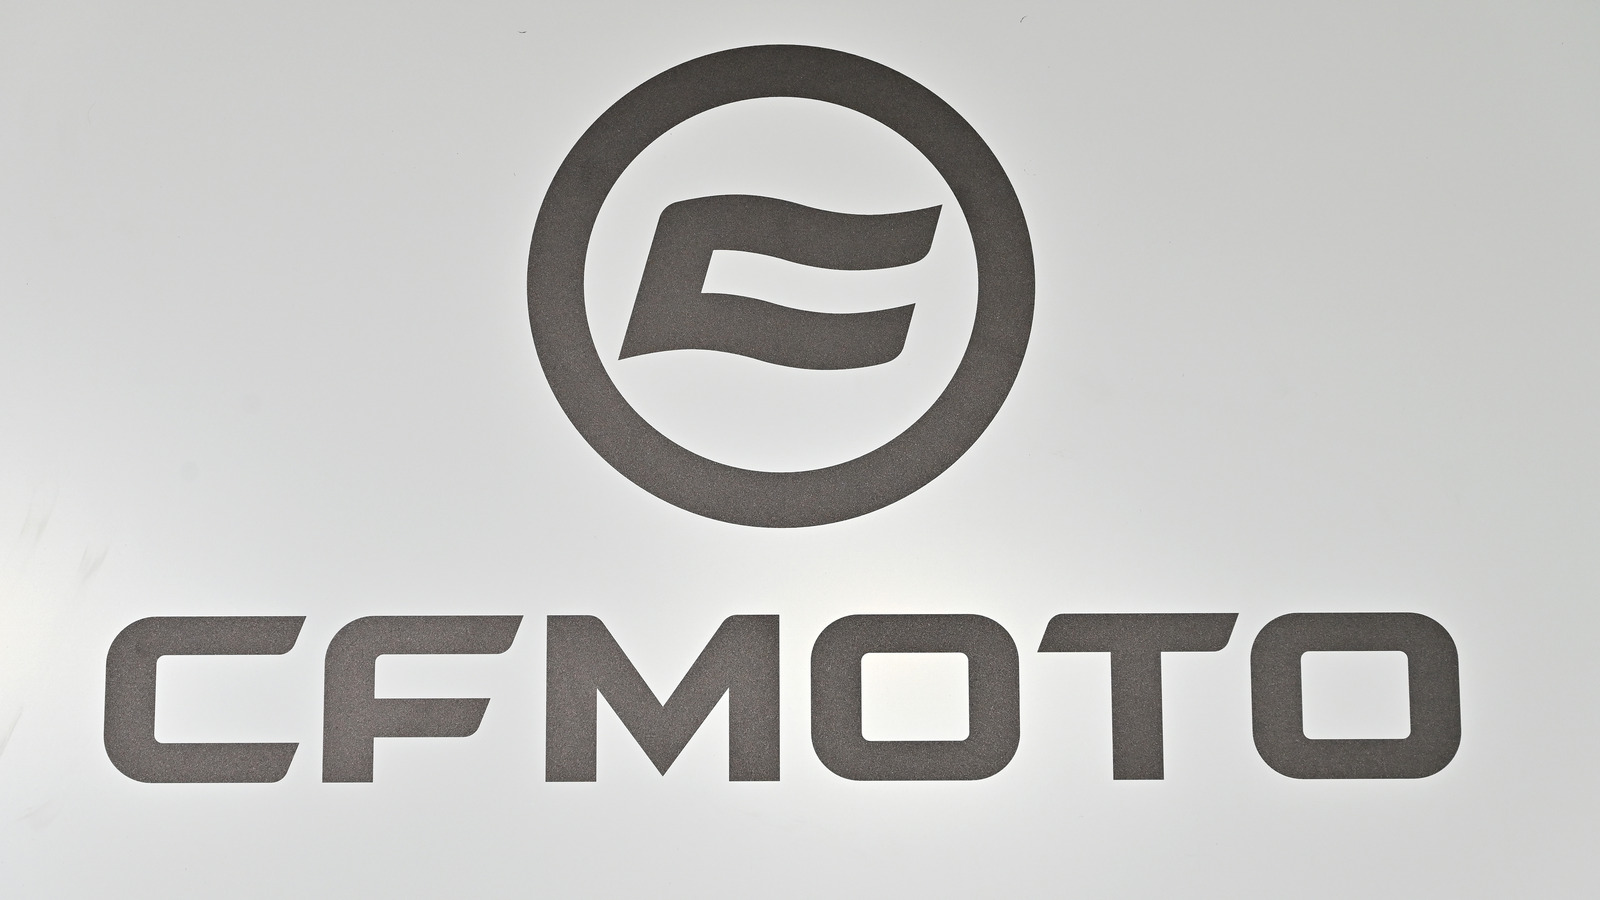 Who Makes CFMOTO Engines & Where Are Their Off-Road Vehicles Produced?